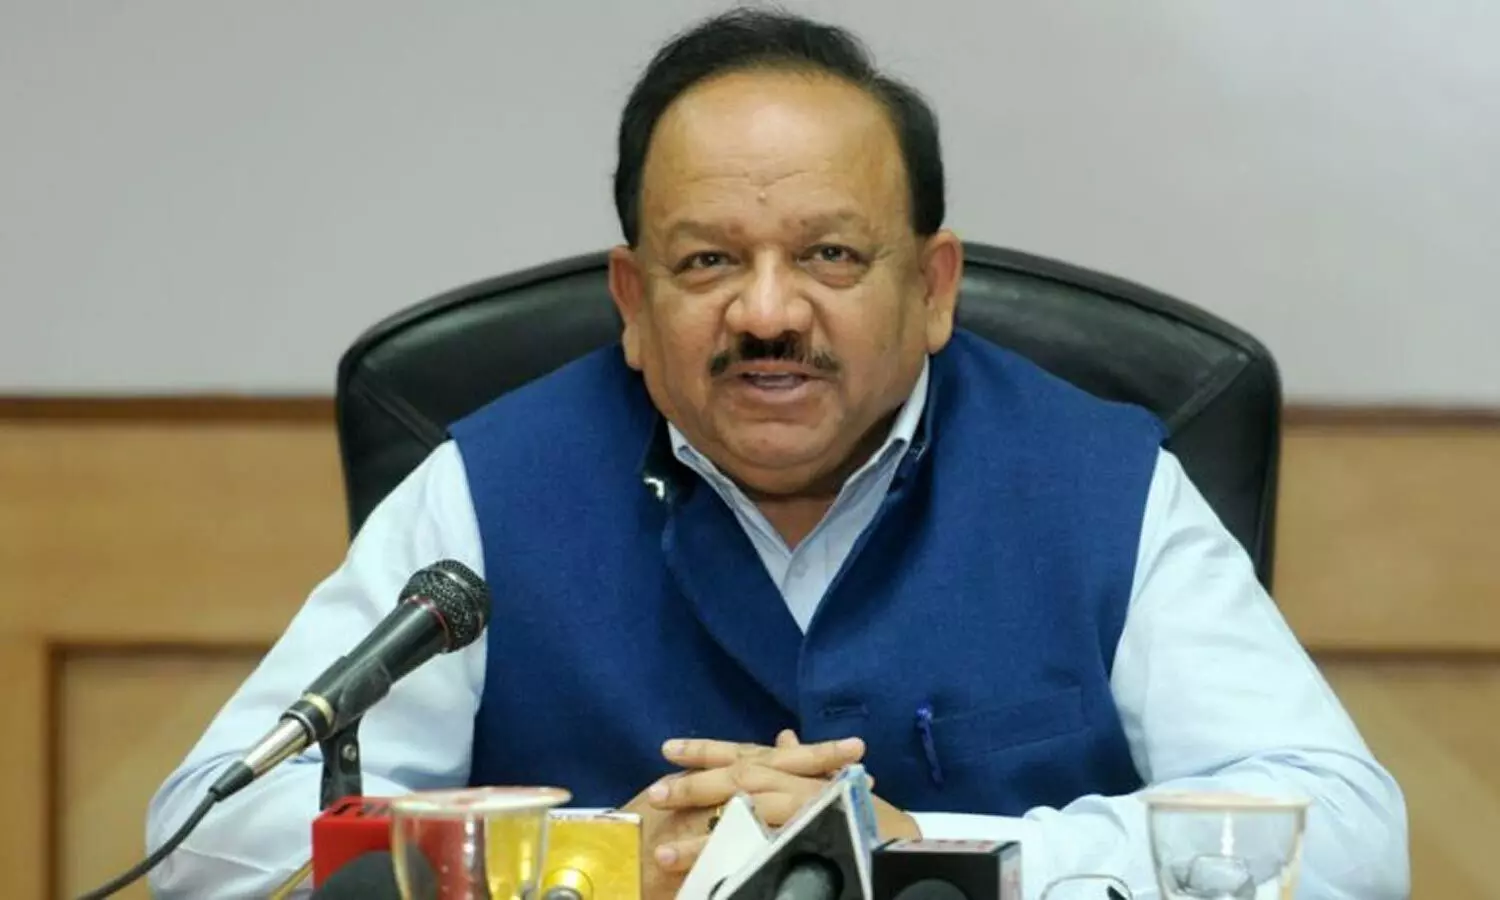 Amid farmers protest near Delhi borders, Dr. Harsh Vardhan requested everyone to follow COVID-19 norms and maintain social distancing.